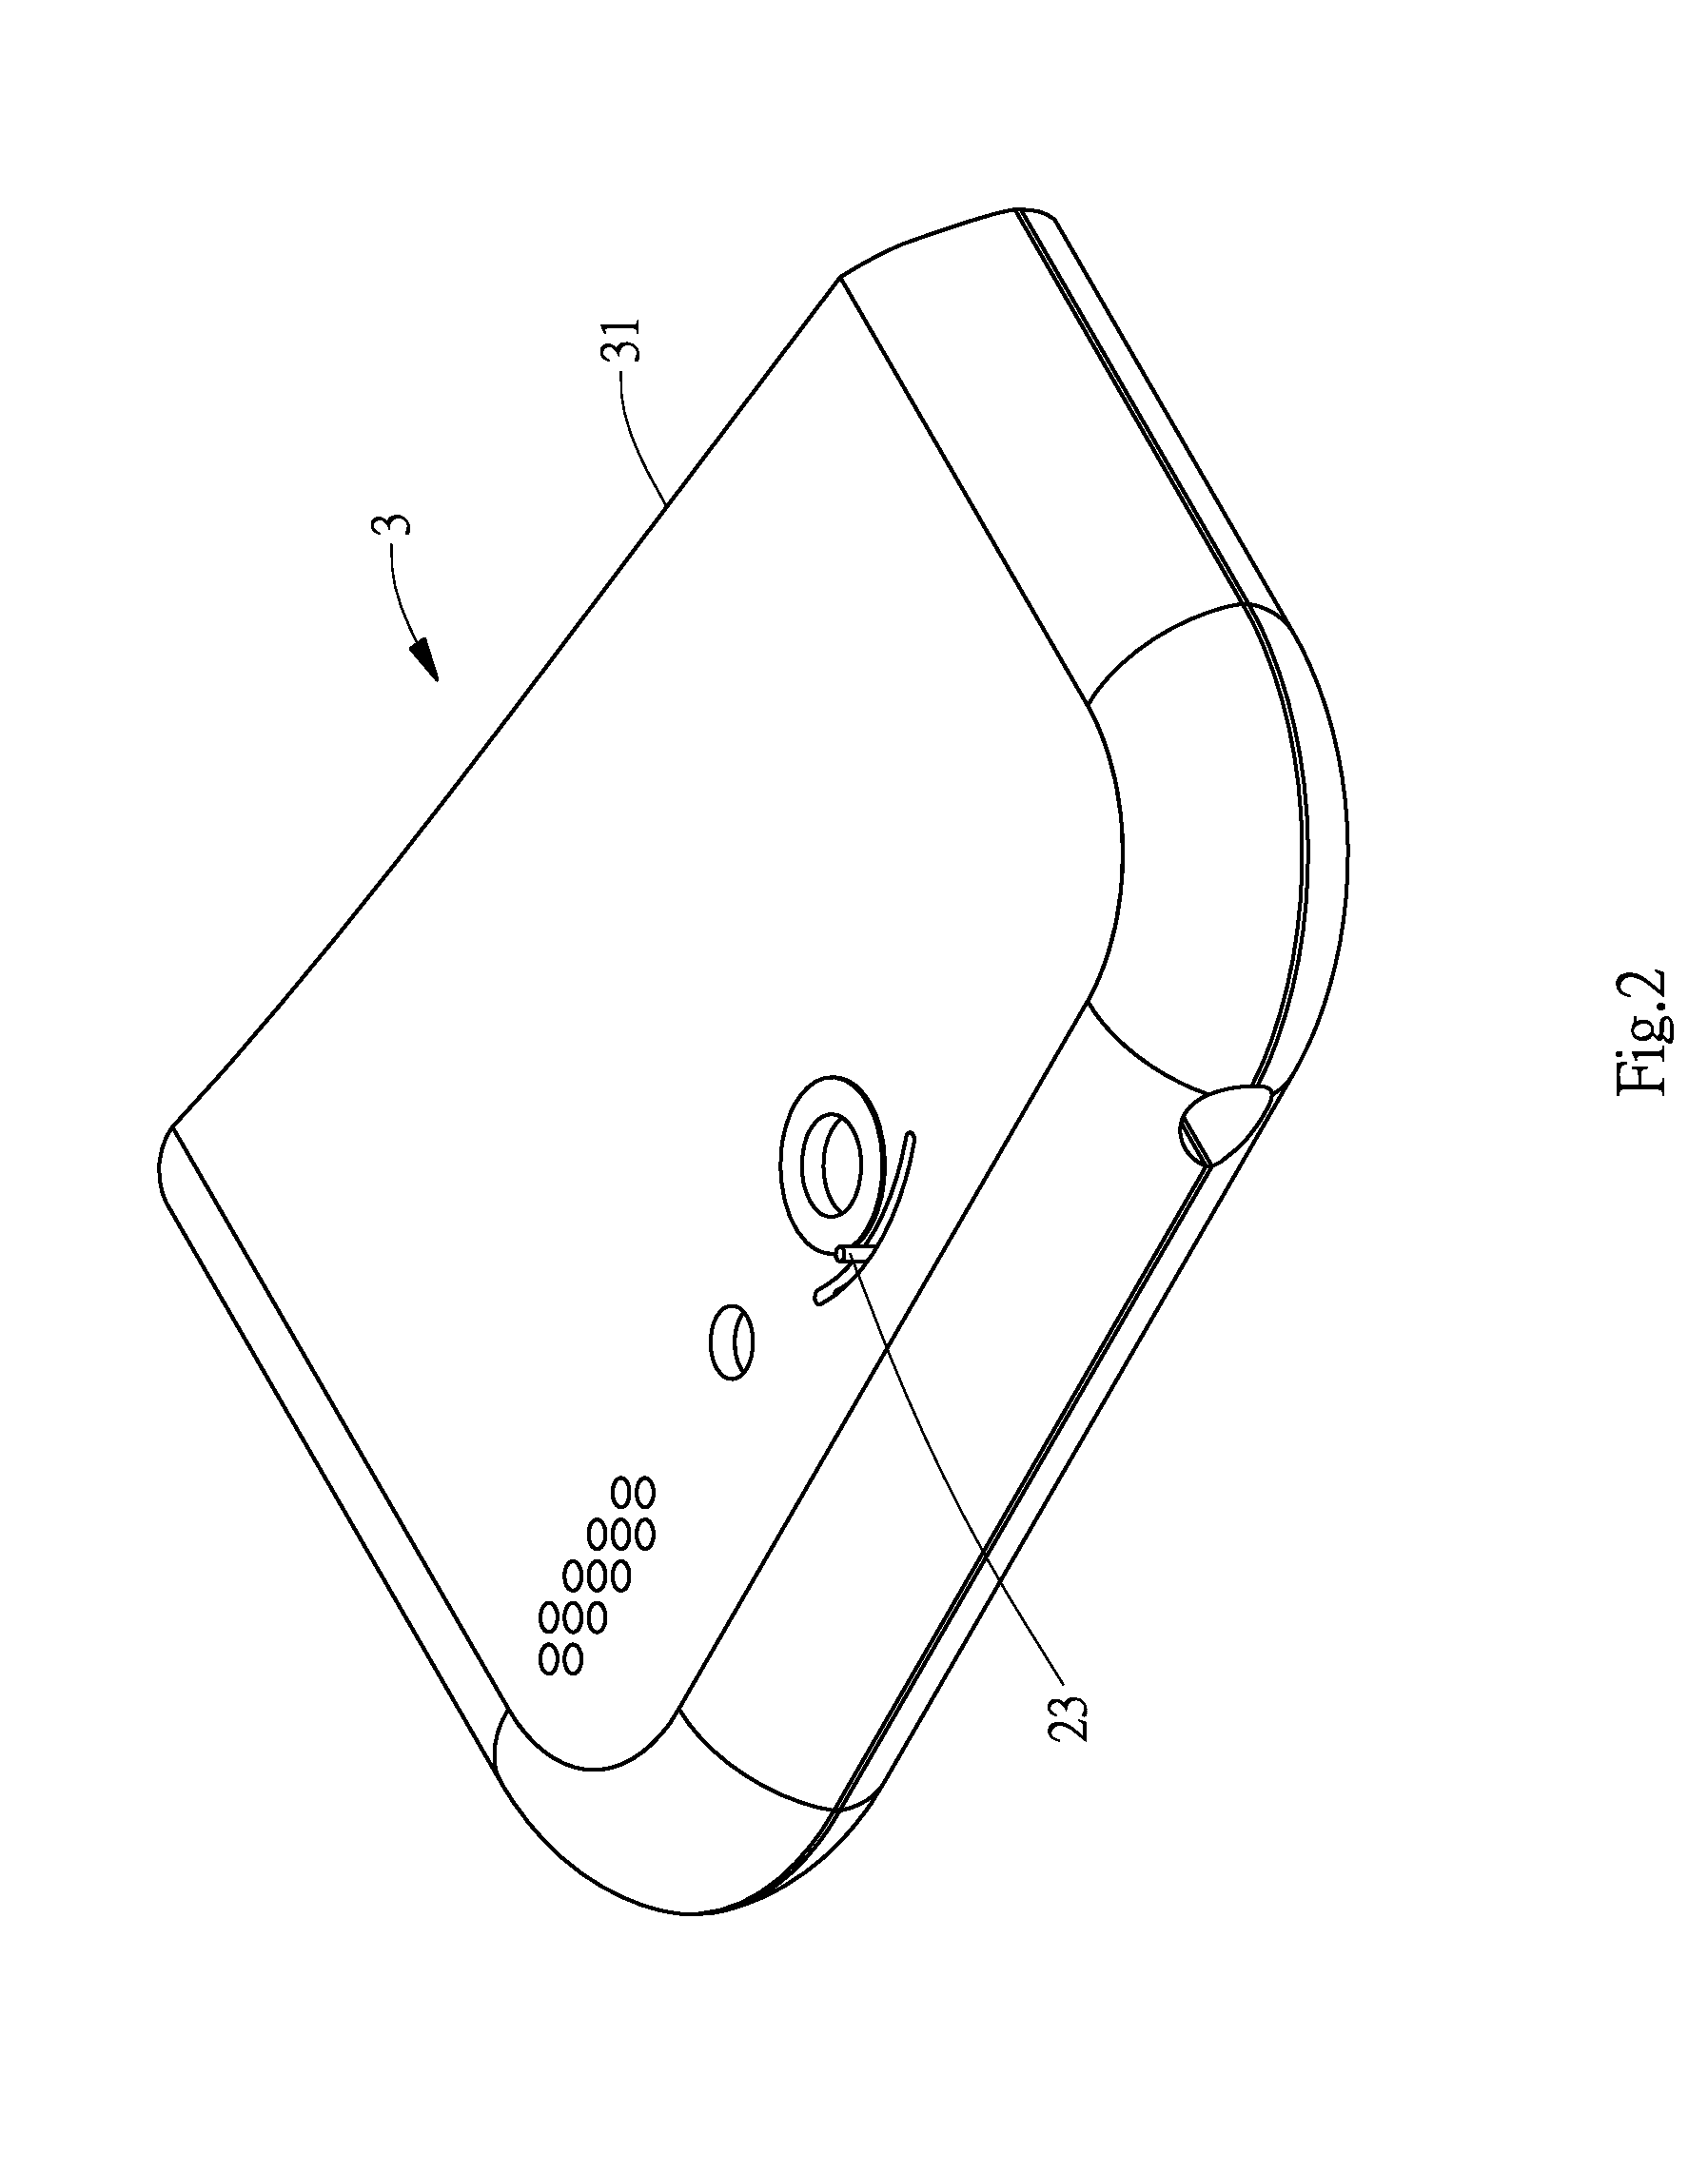 Adjustable and replaceable lens structure for portable electronic devices